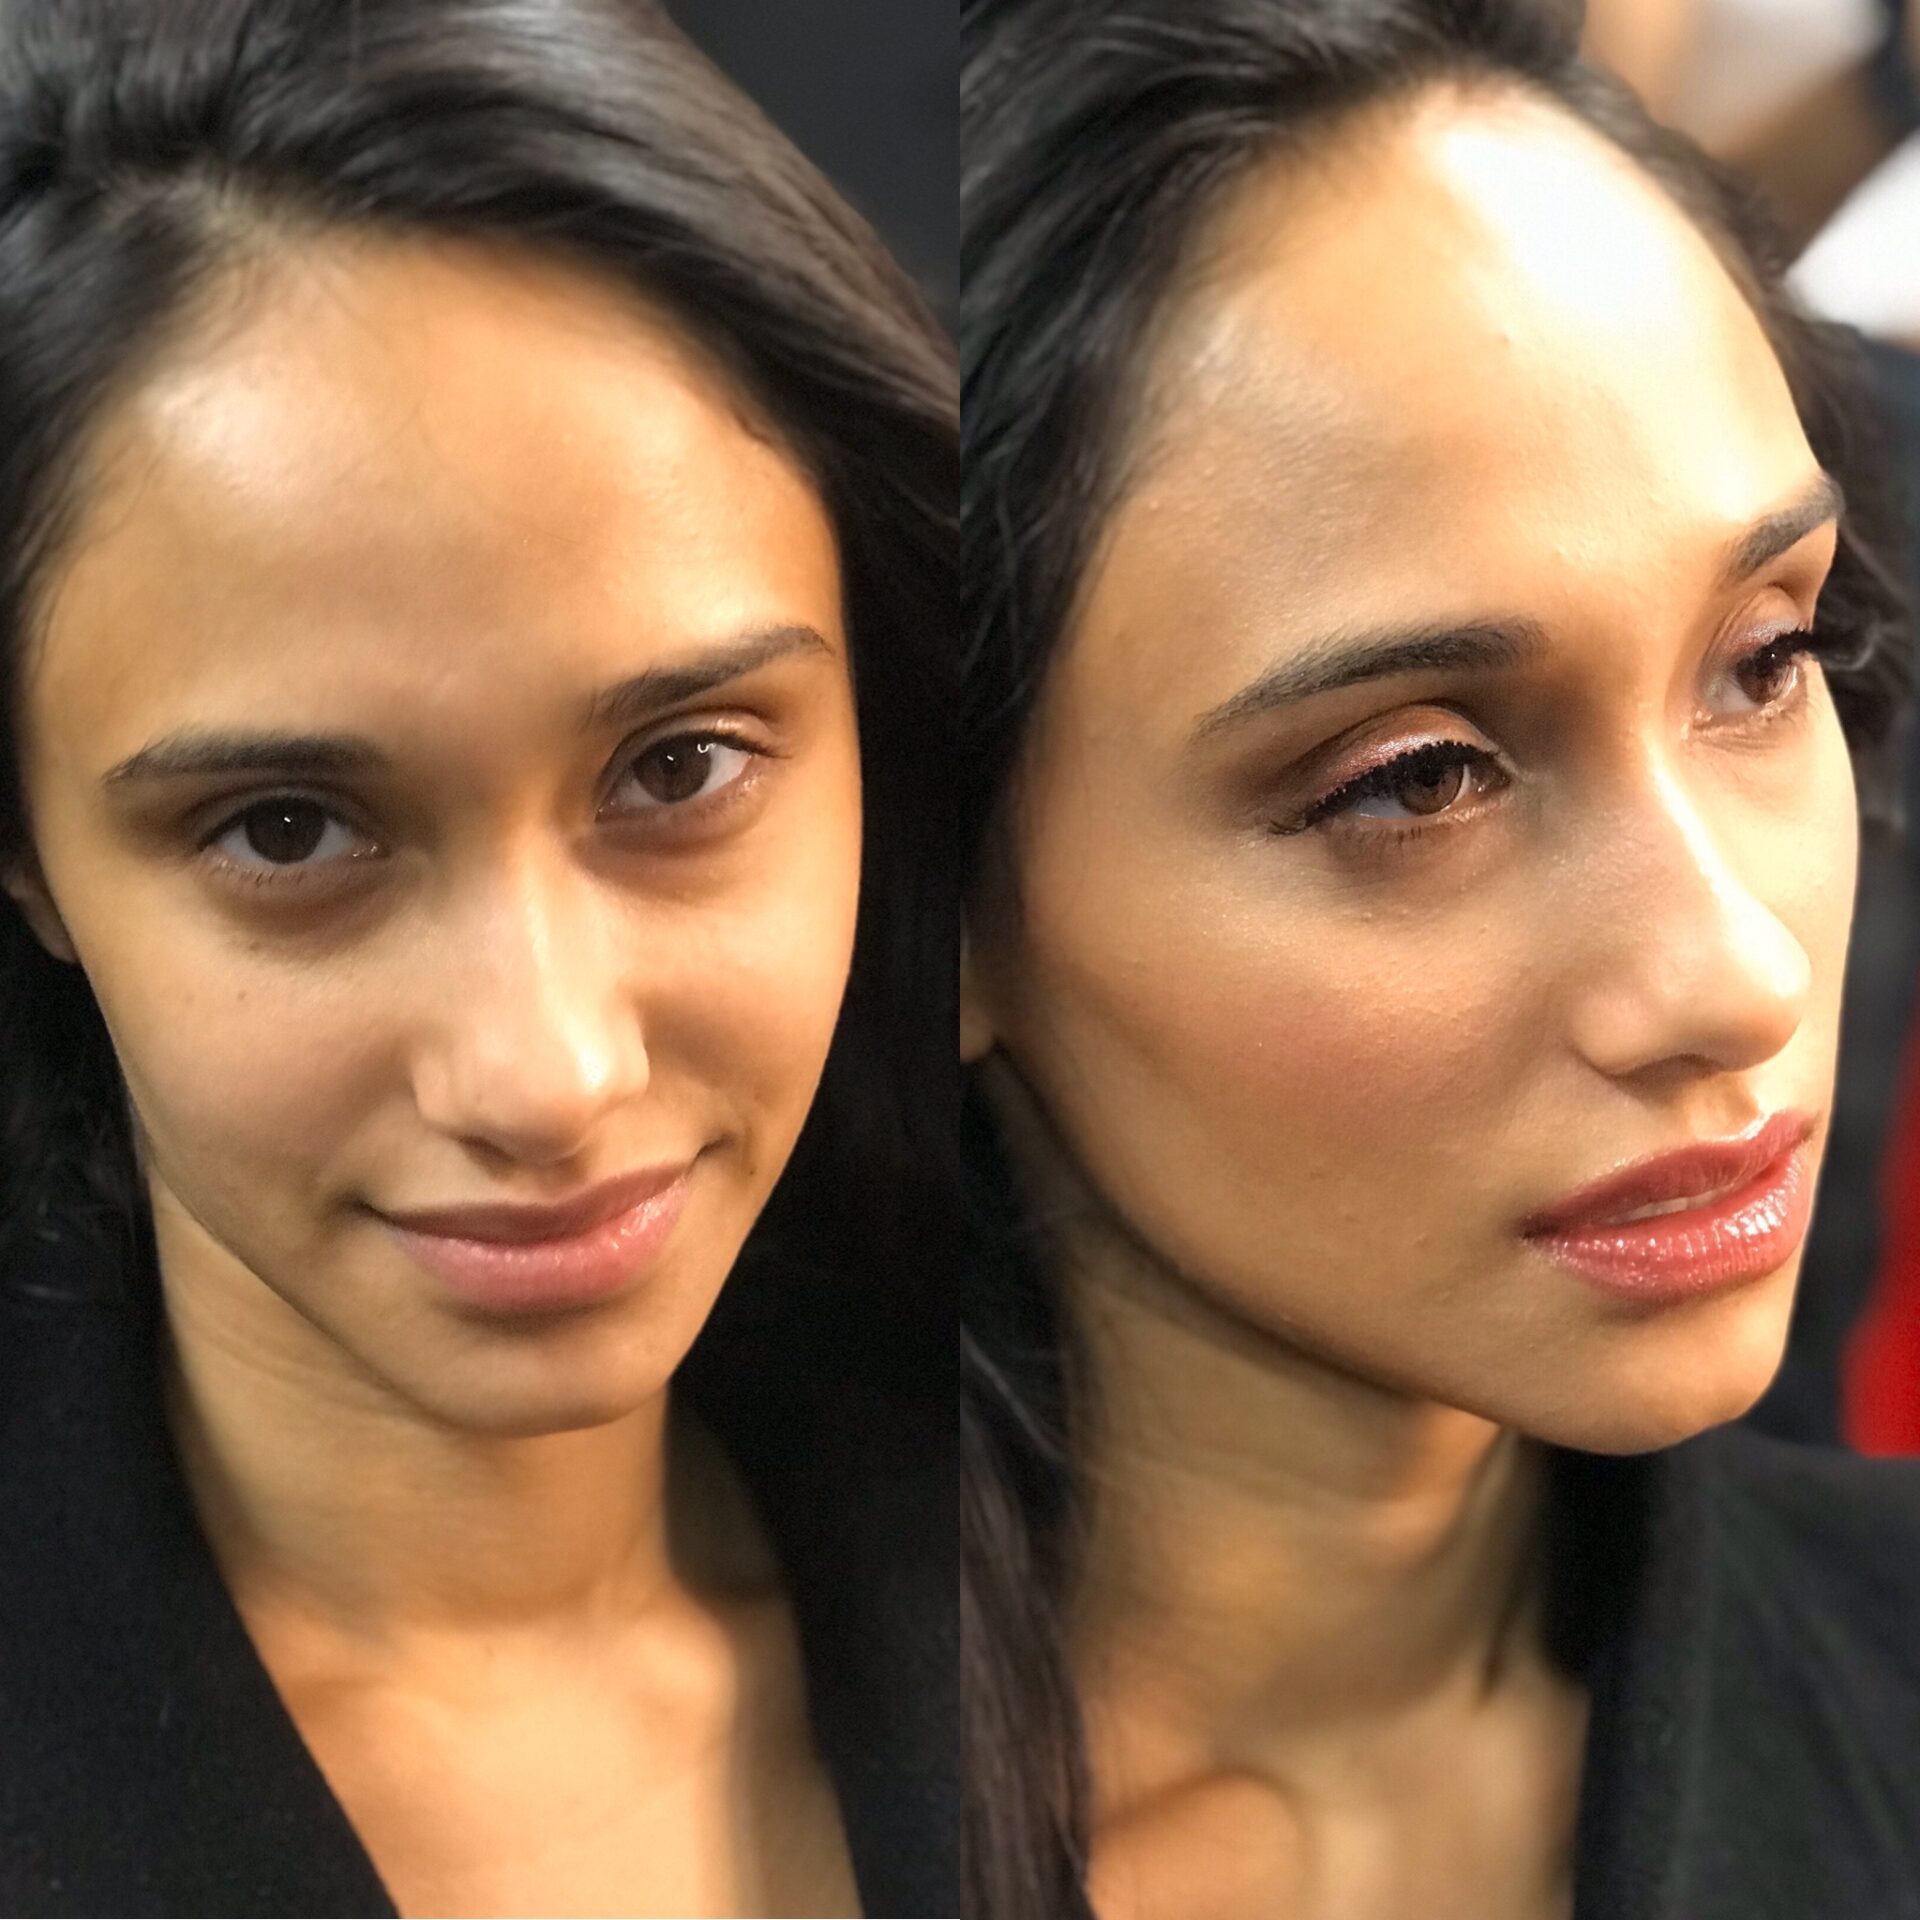 A person’s before and after makeup look